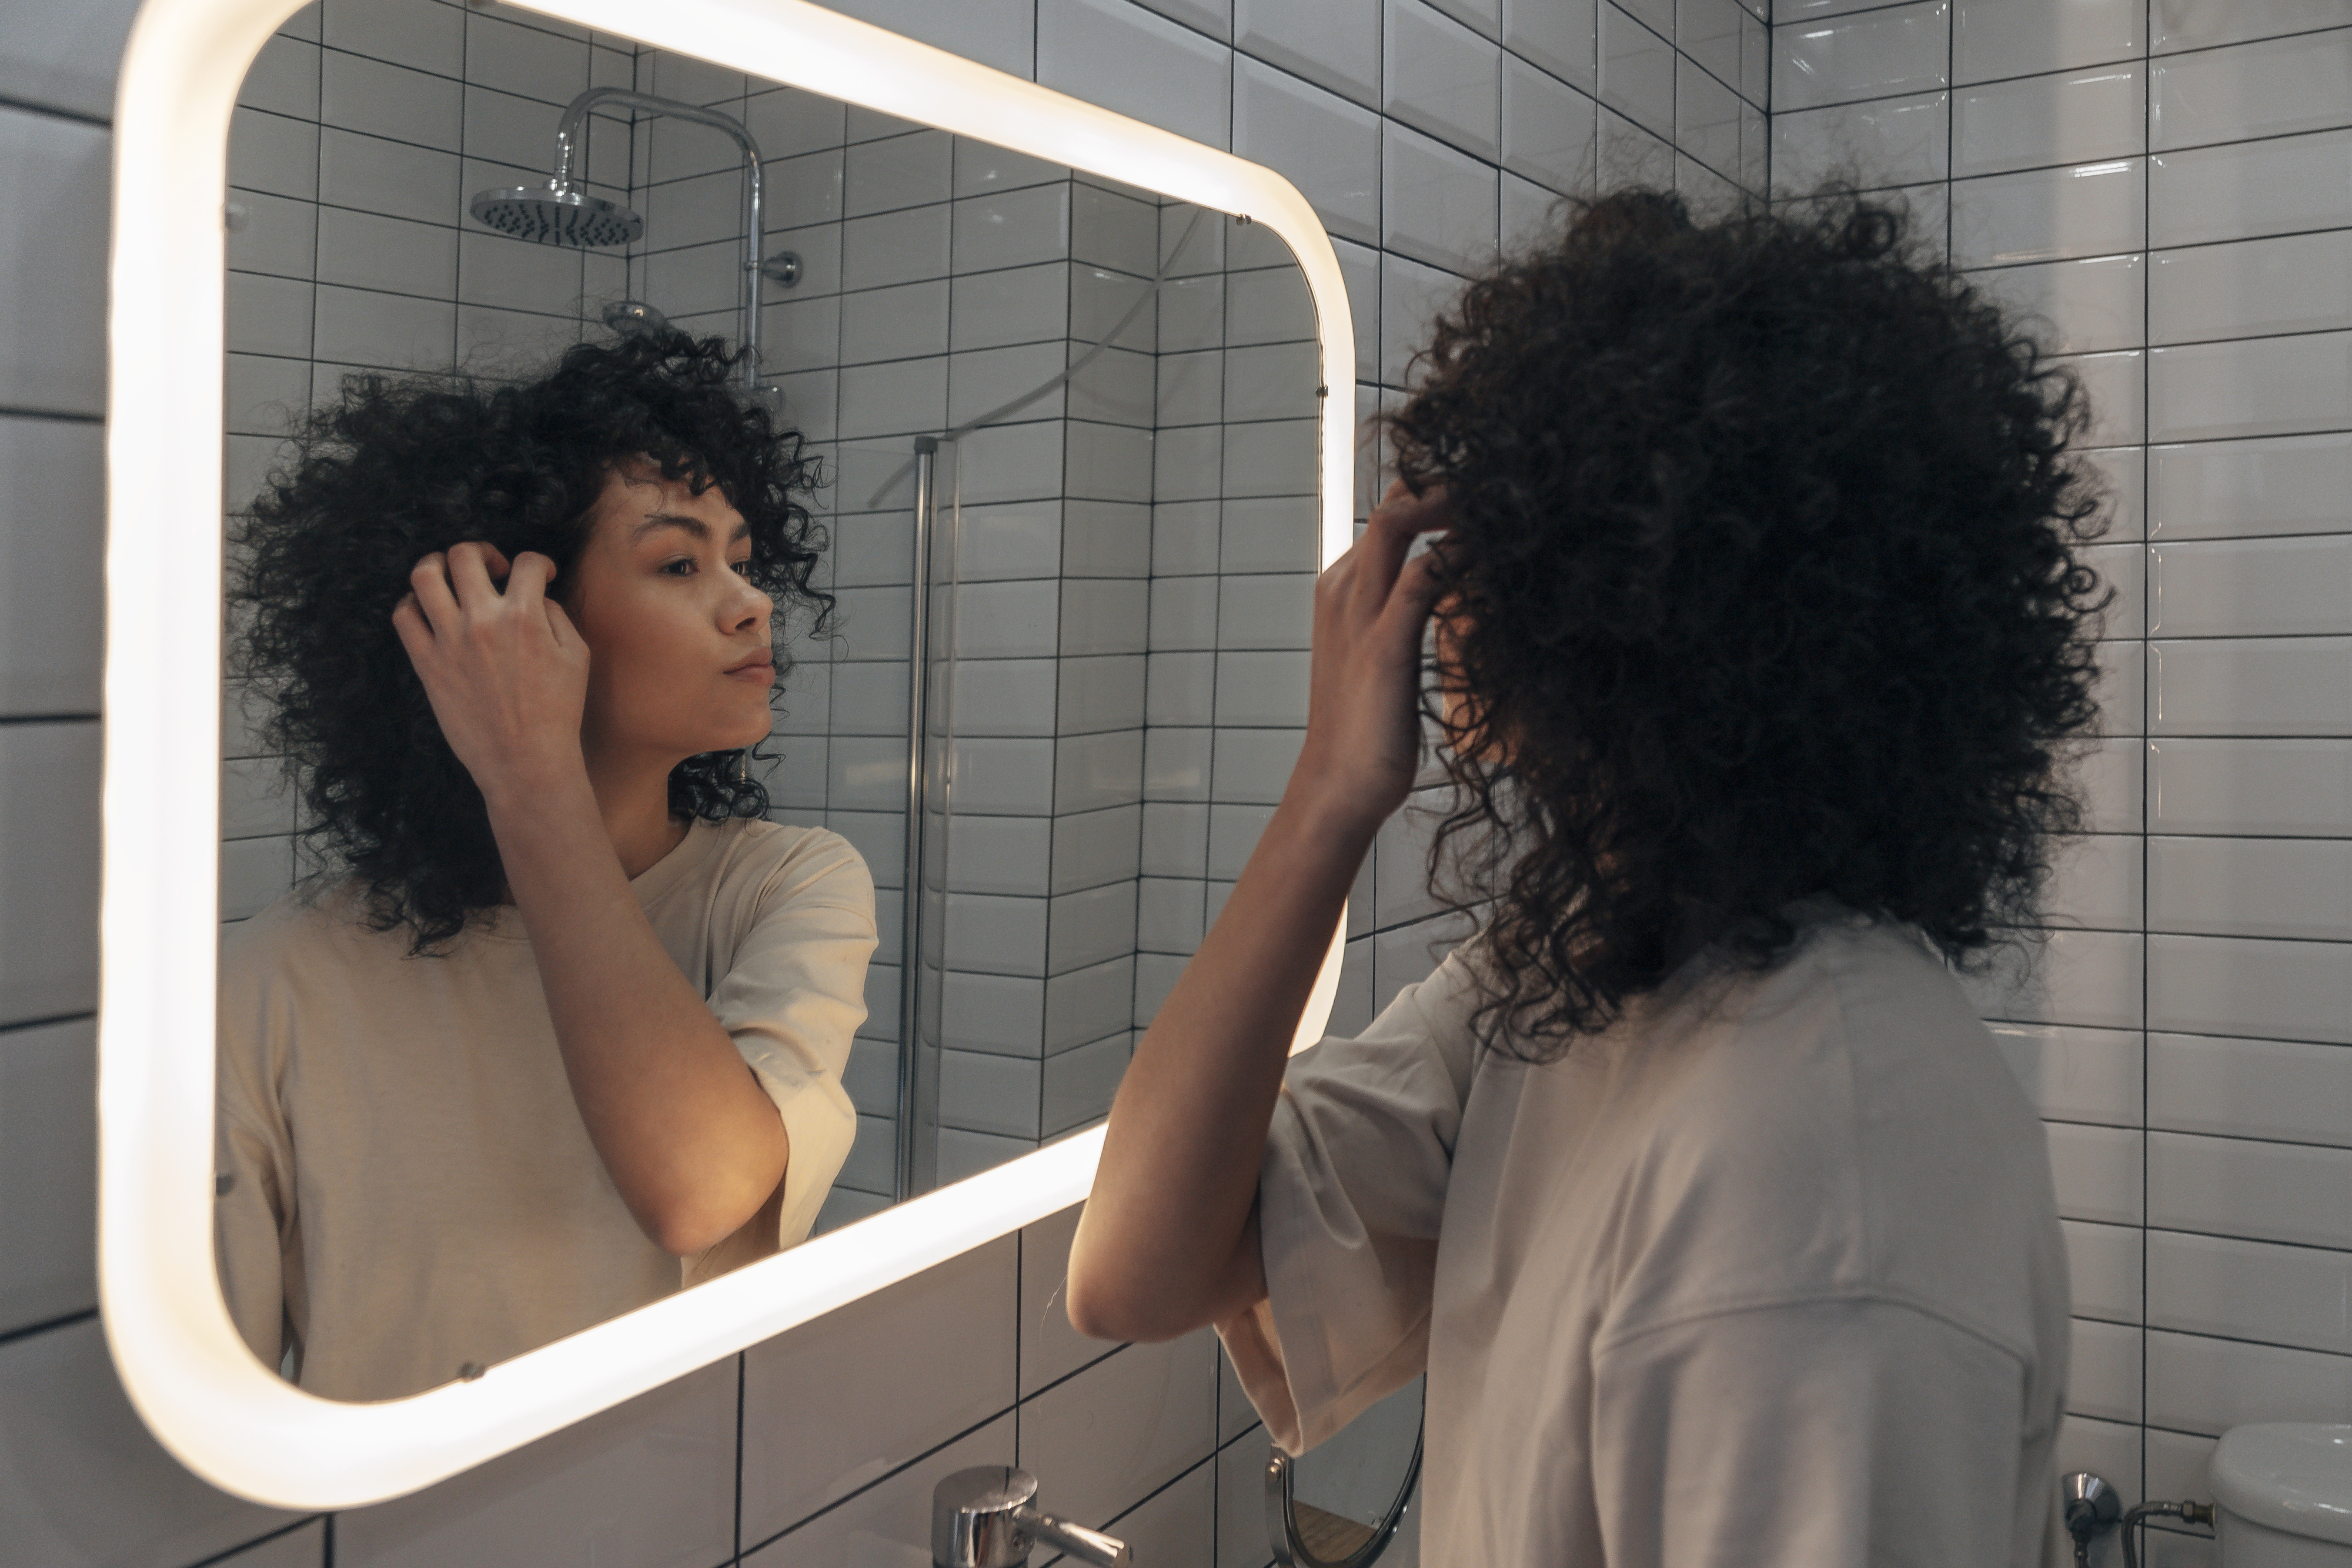 Person adjusting their hair while looking in a mirror